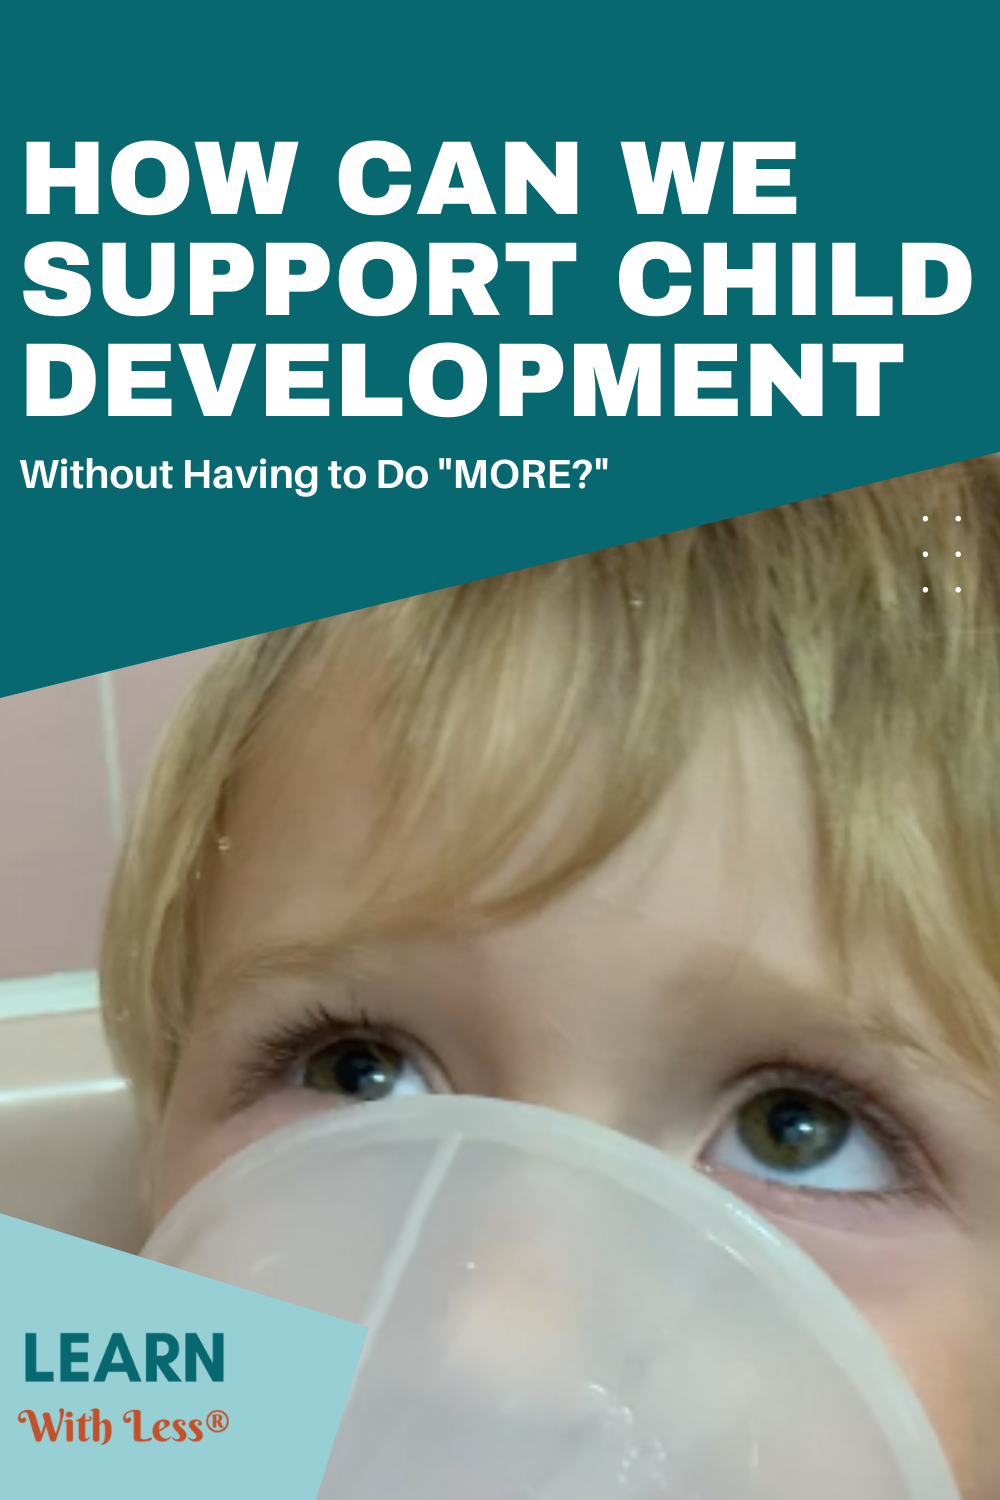 How Can We Support Early Child Development?